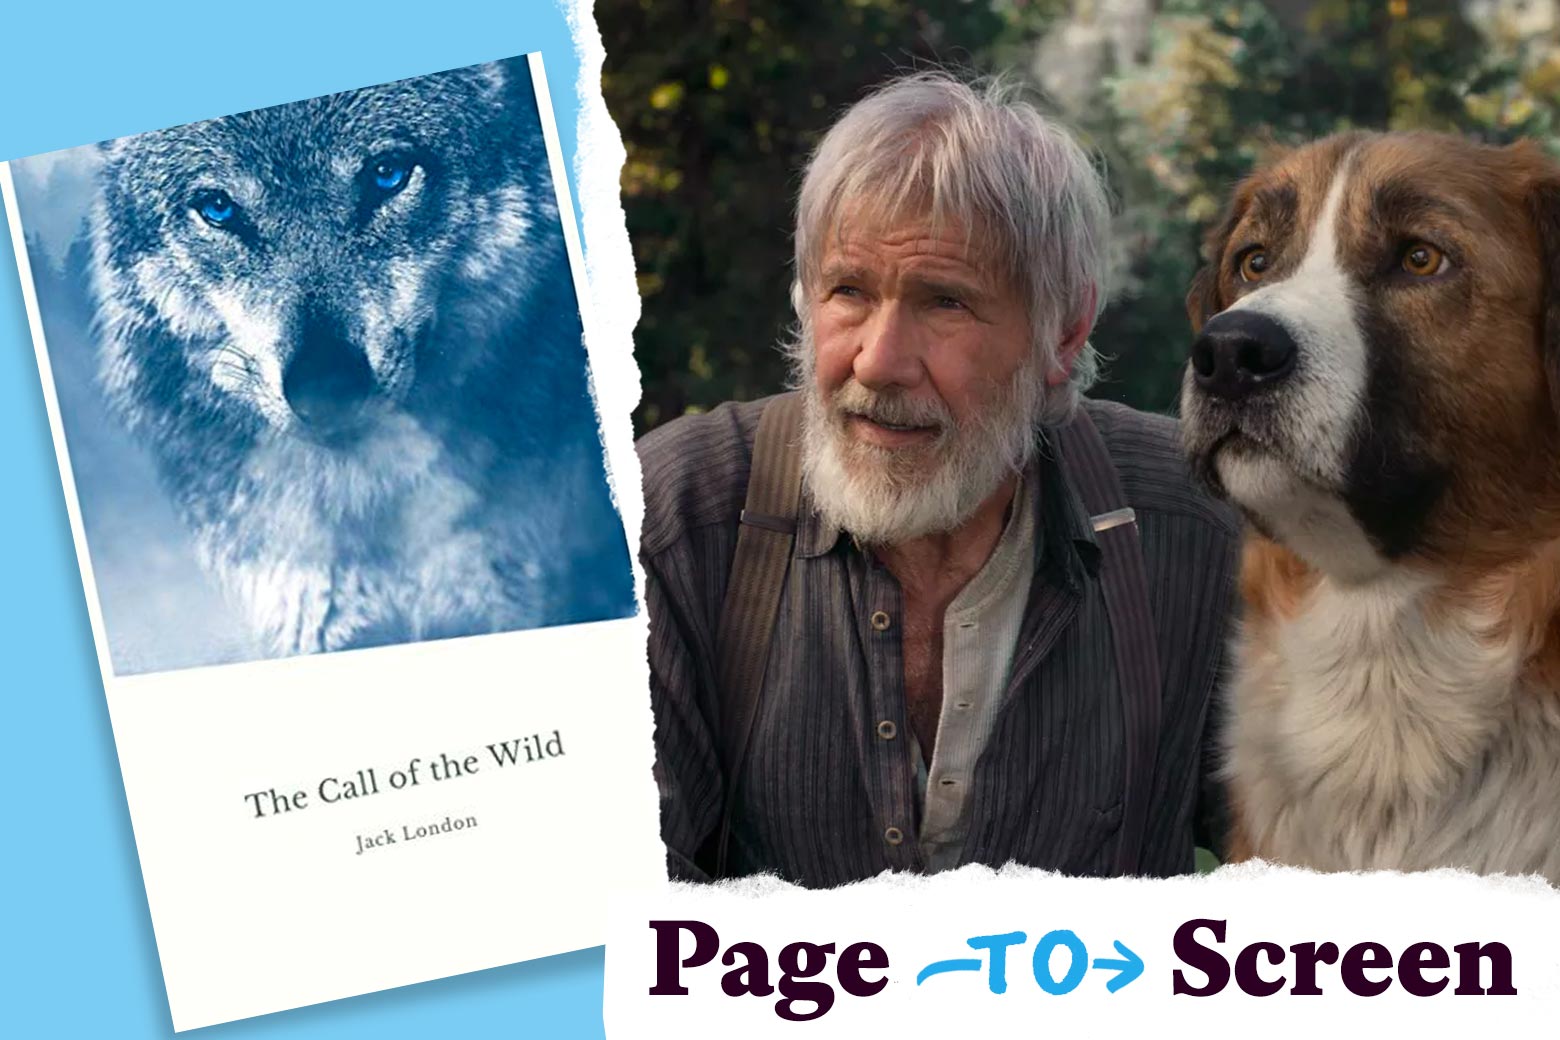 Left: the cover of The Call of the Wild by Jack London with a dog on it. Right: Harrison Ford with a dog. In the corner, a logo reads "Page to Screen."